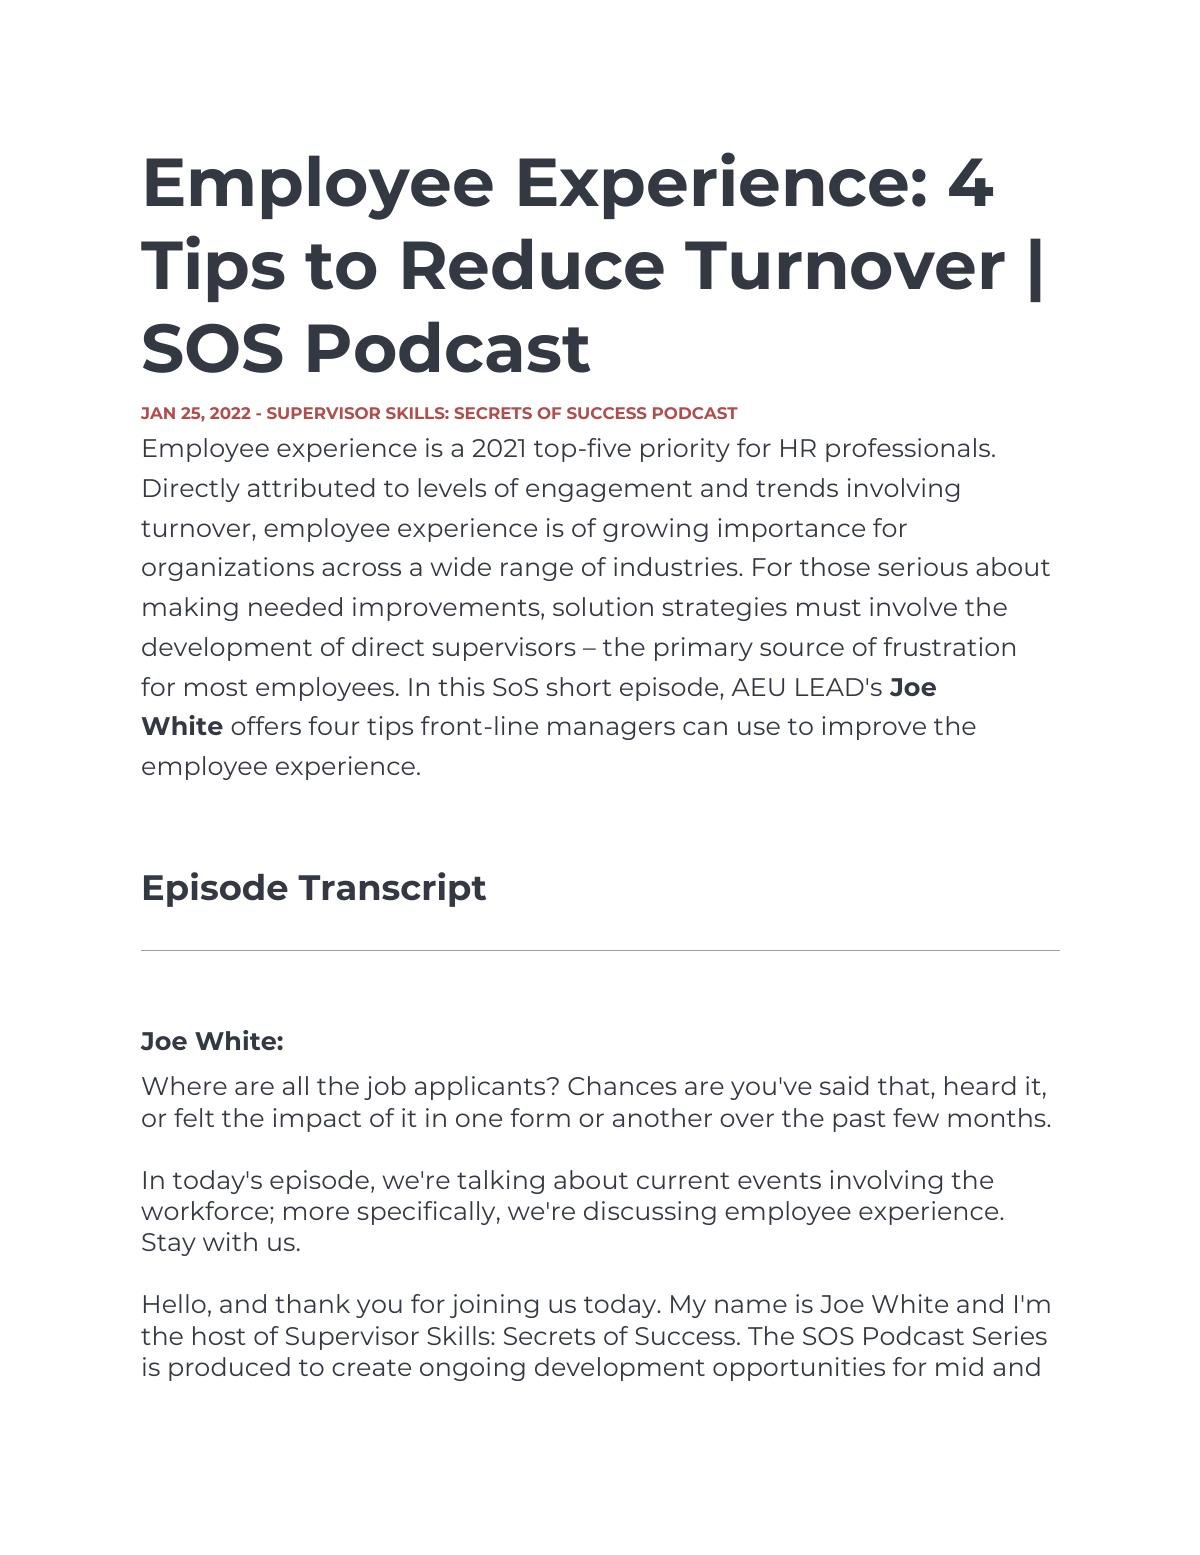 Employee Experience: 4 Tips to Reduce Turnover | SOS Podcast